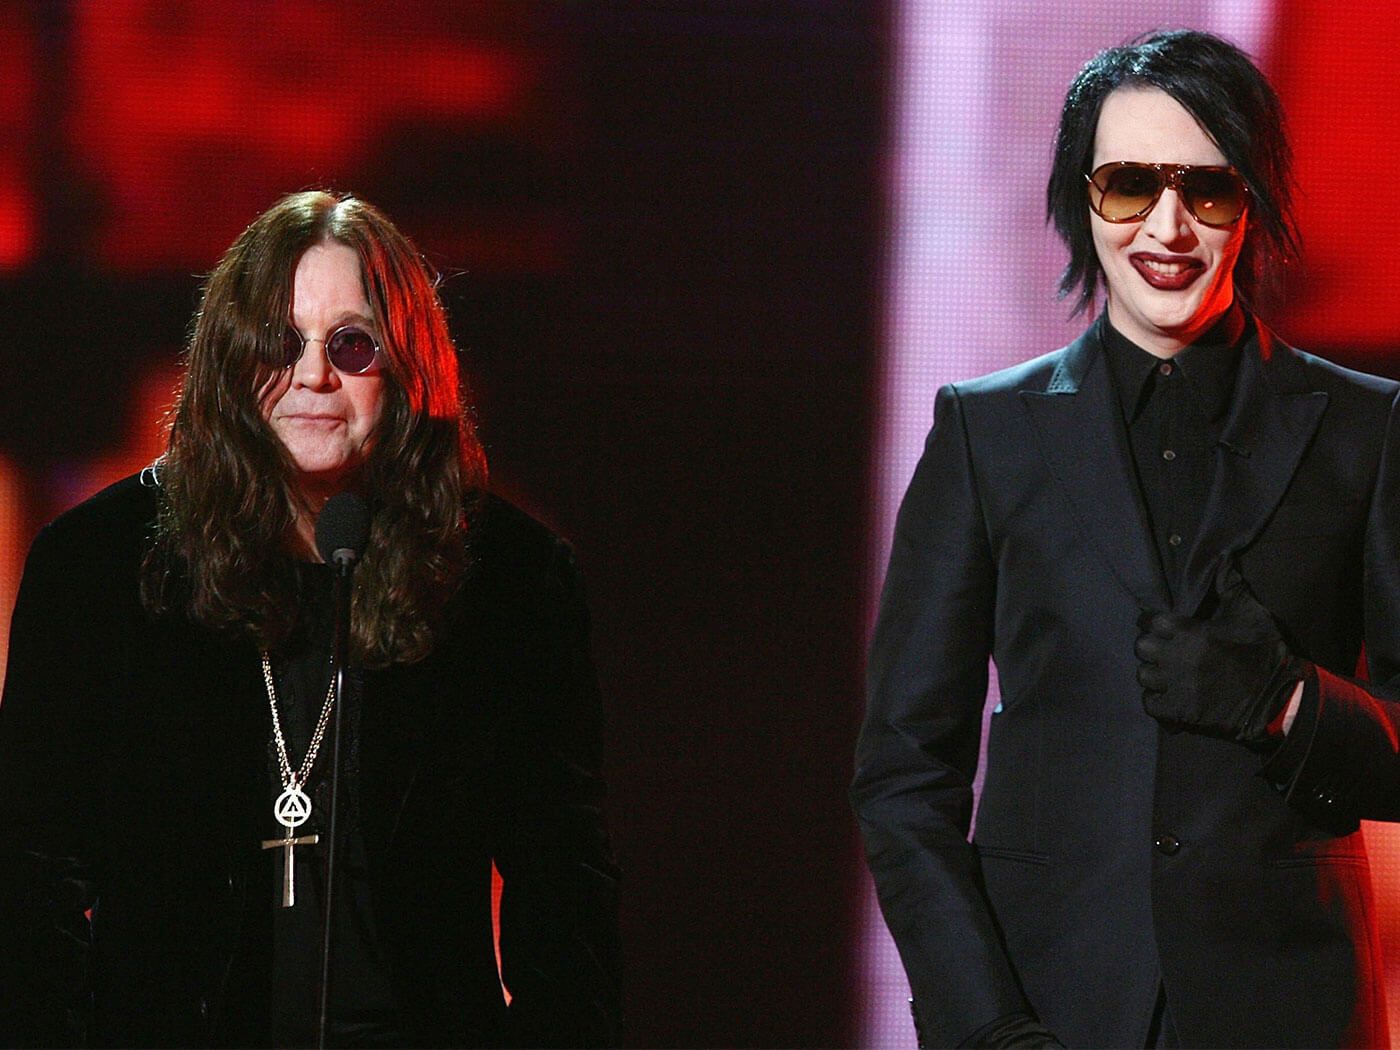 Marilyn Manson will join Ozzy Osbourne on tour next year